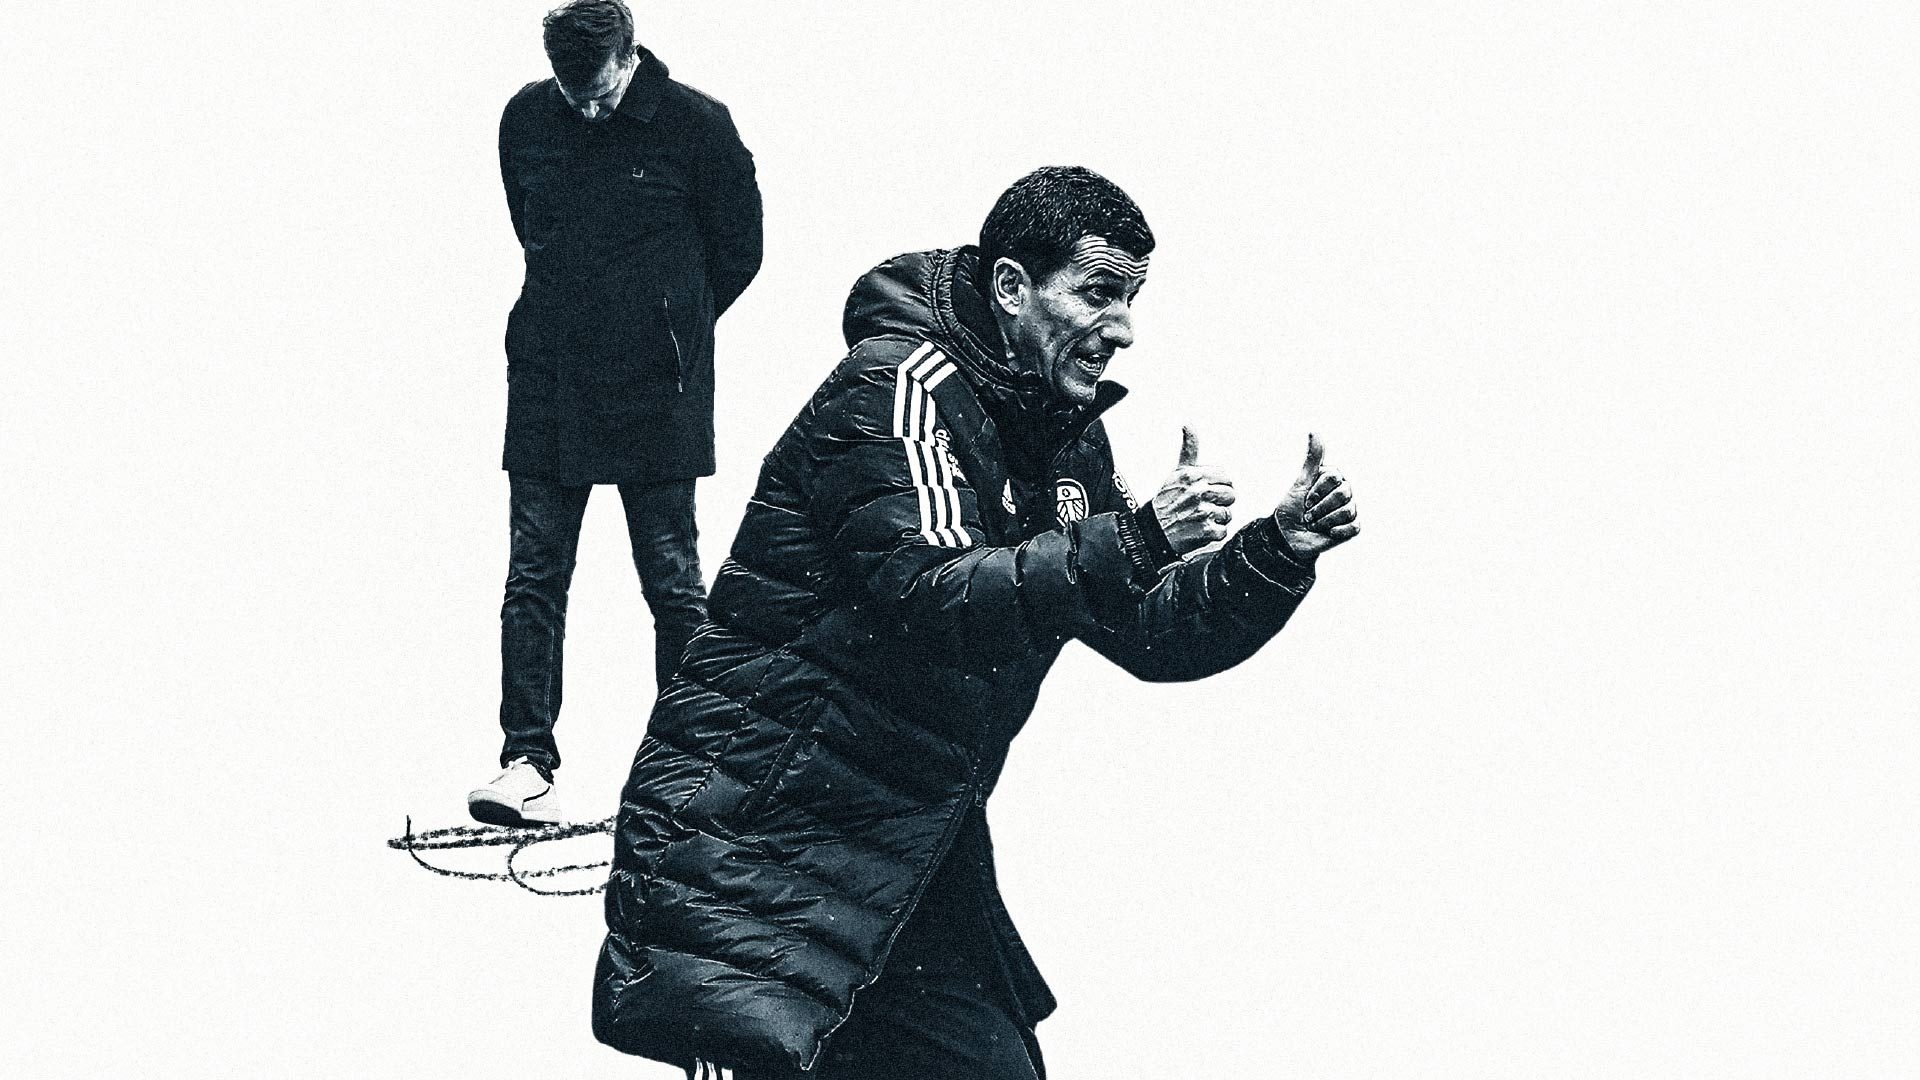 A collage showing Jesse Marsch looking morose in the background, and Javi Gracia giving two thumbs up in the front